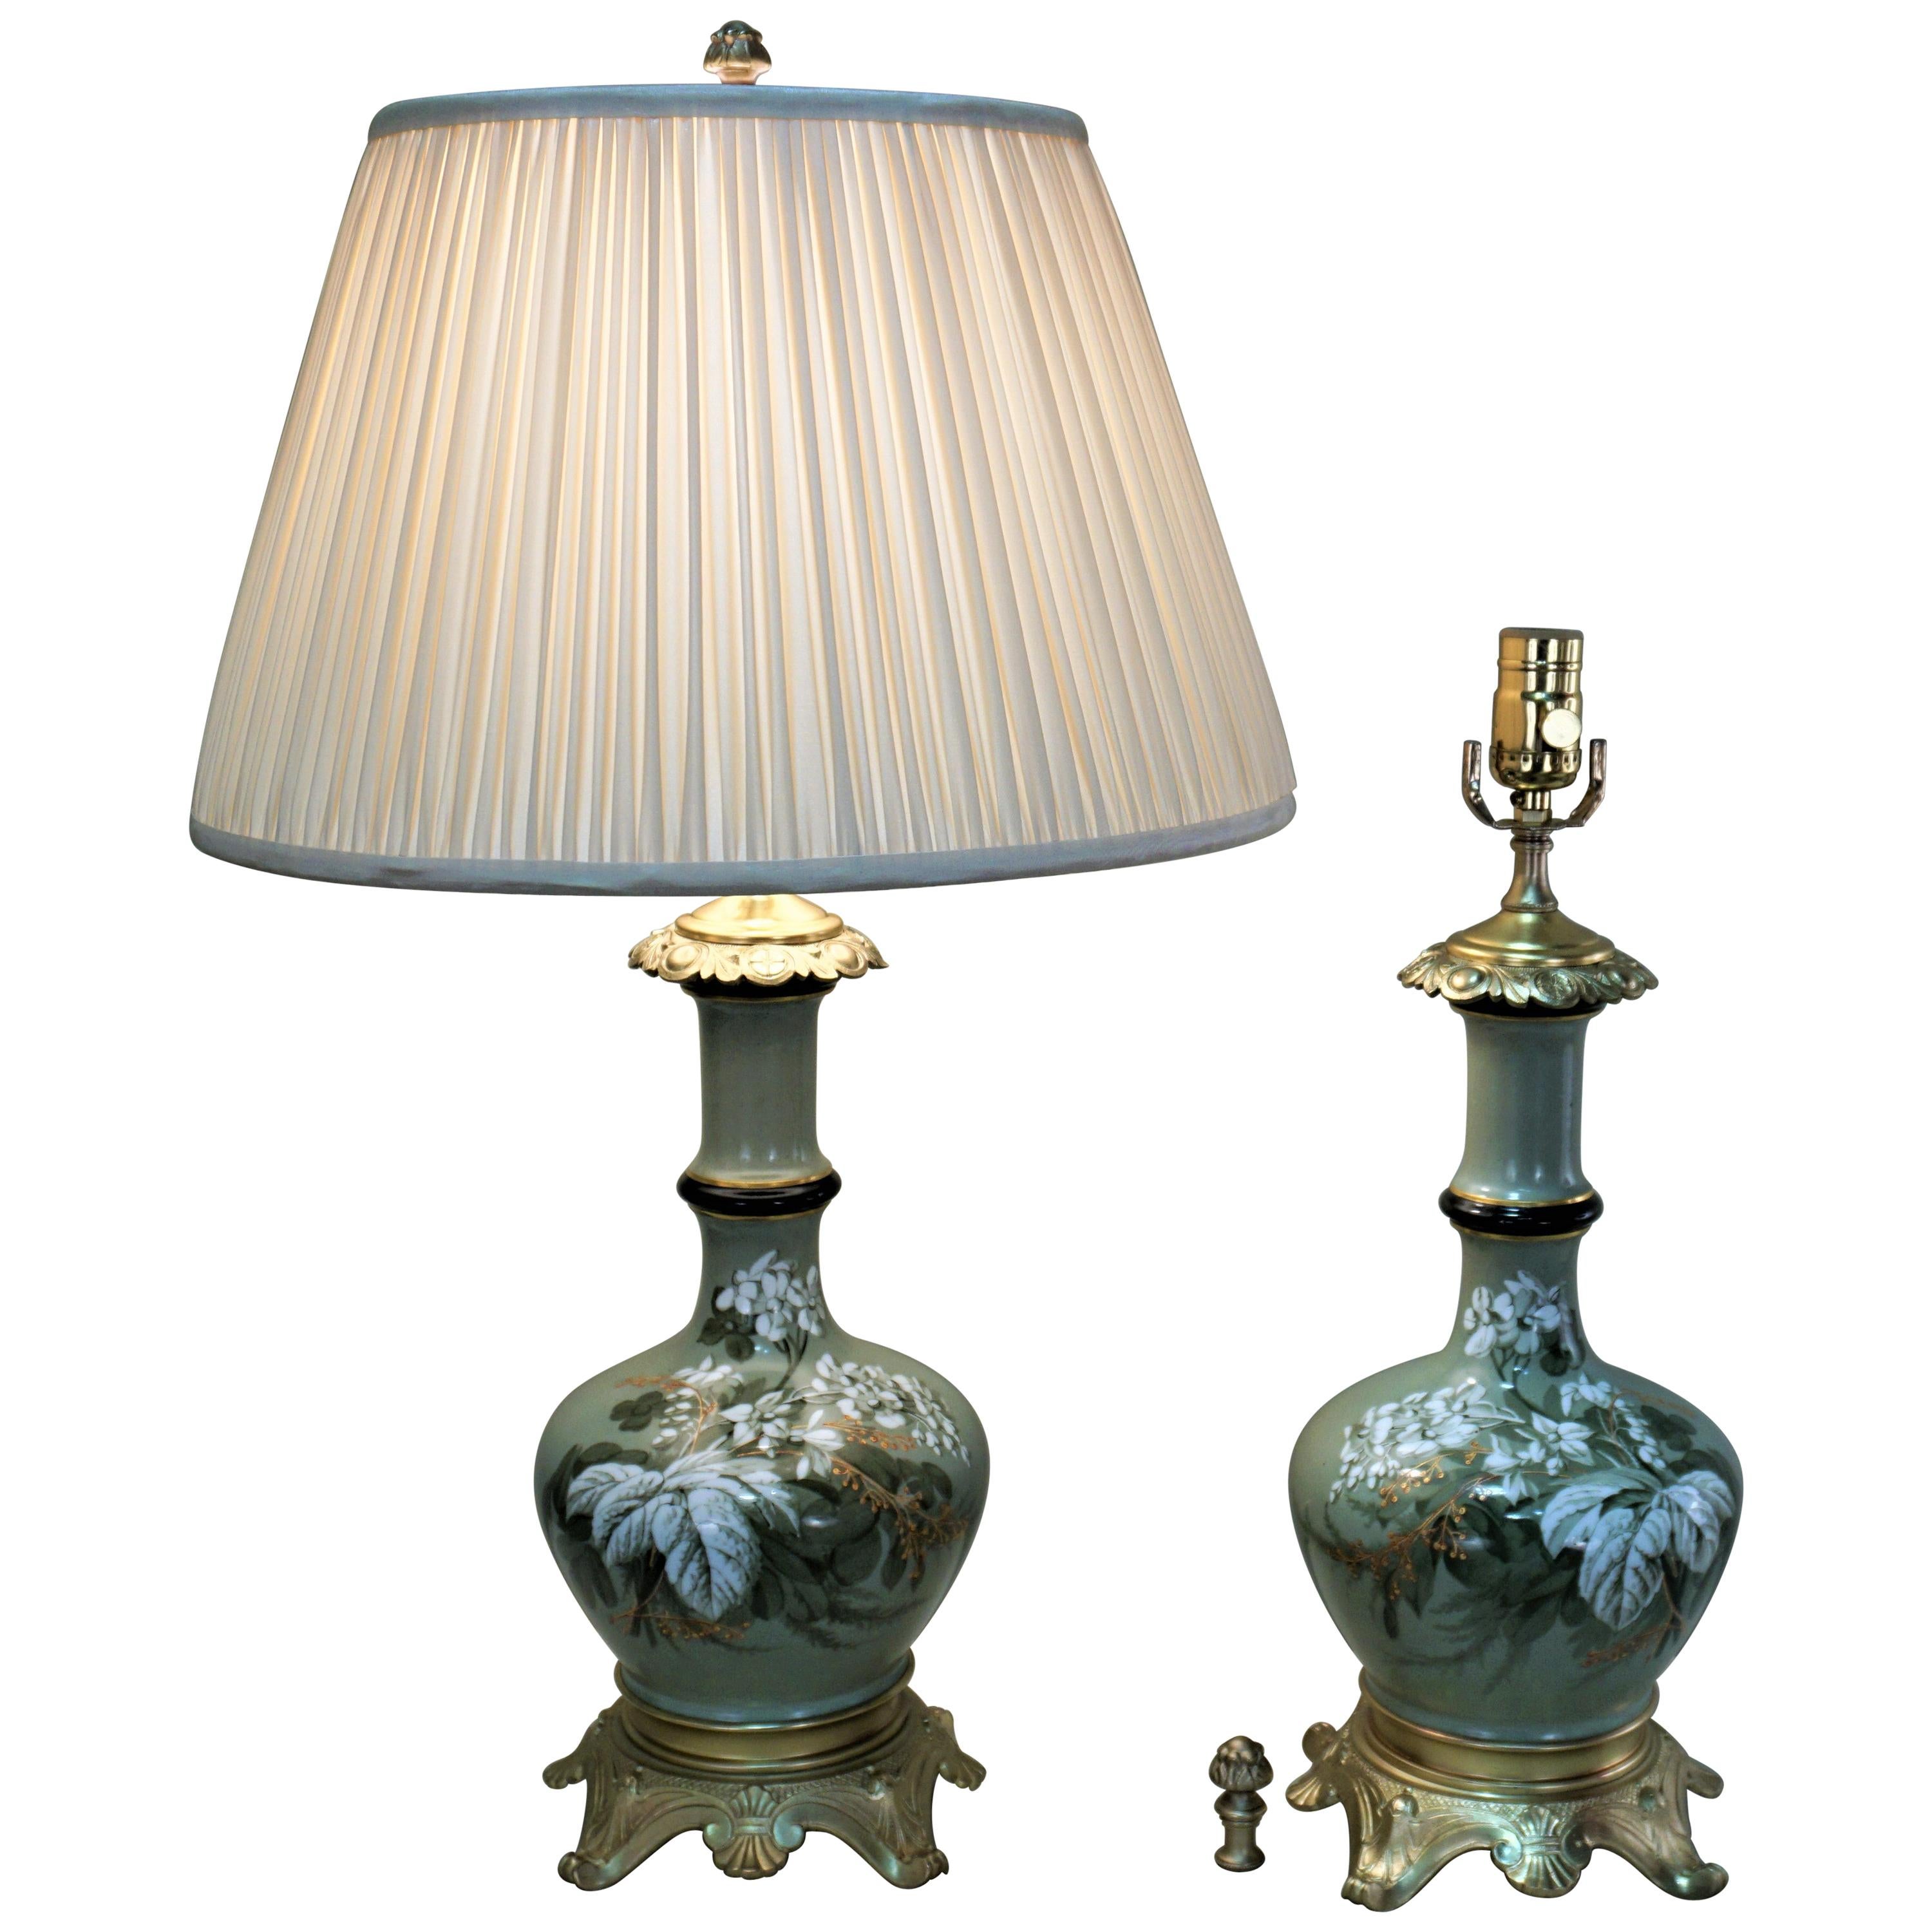 Pair of 19th Century French Porcelain and Bronze Table Lamps